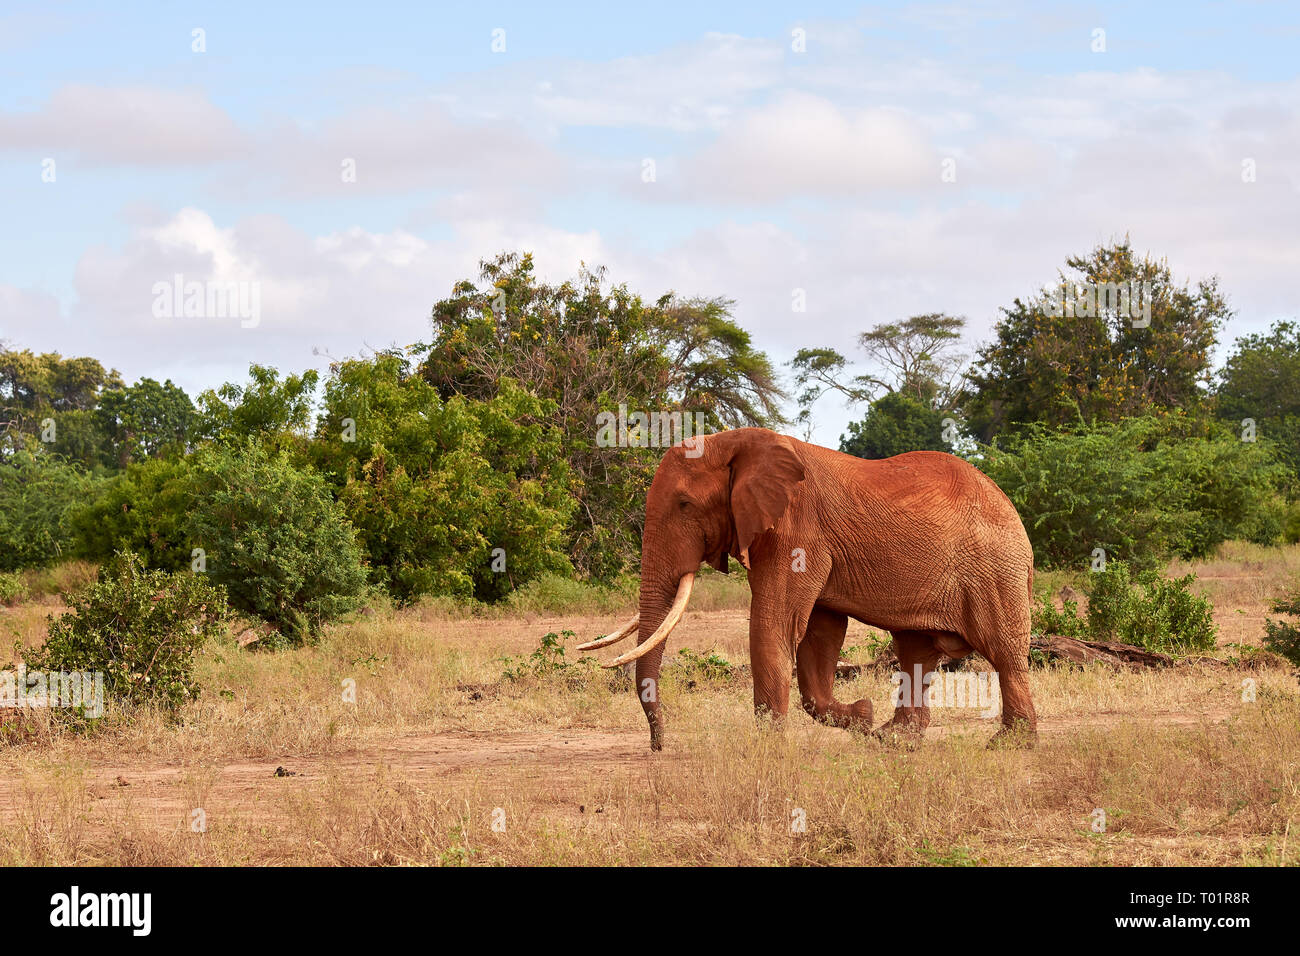 Elephants in nature. African safari in Kenya with trees under blue sky. Stock Photo